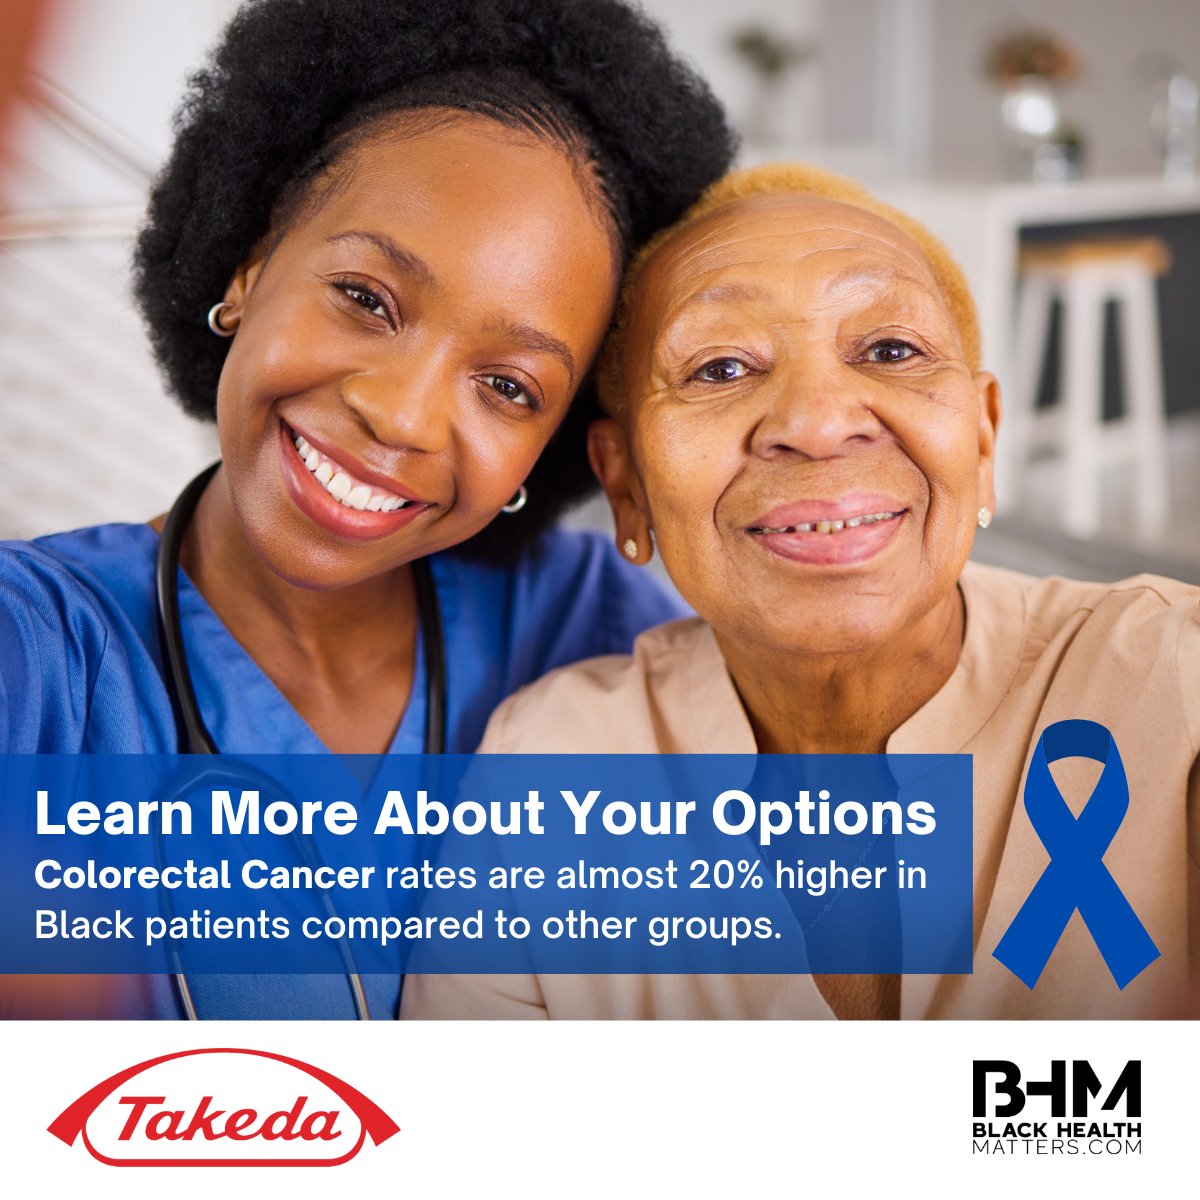 Have you spoken to your doctor about your risks and your options? African American men face a 20% higher risk of colorectal cancer compared to other racial groups. Clinical trials offer additional options for patients. Learn more at bit.ly/3tNaxGP